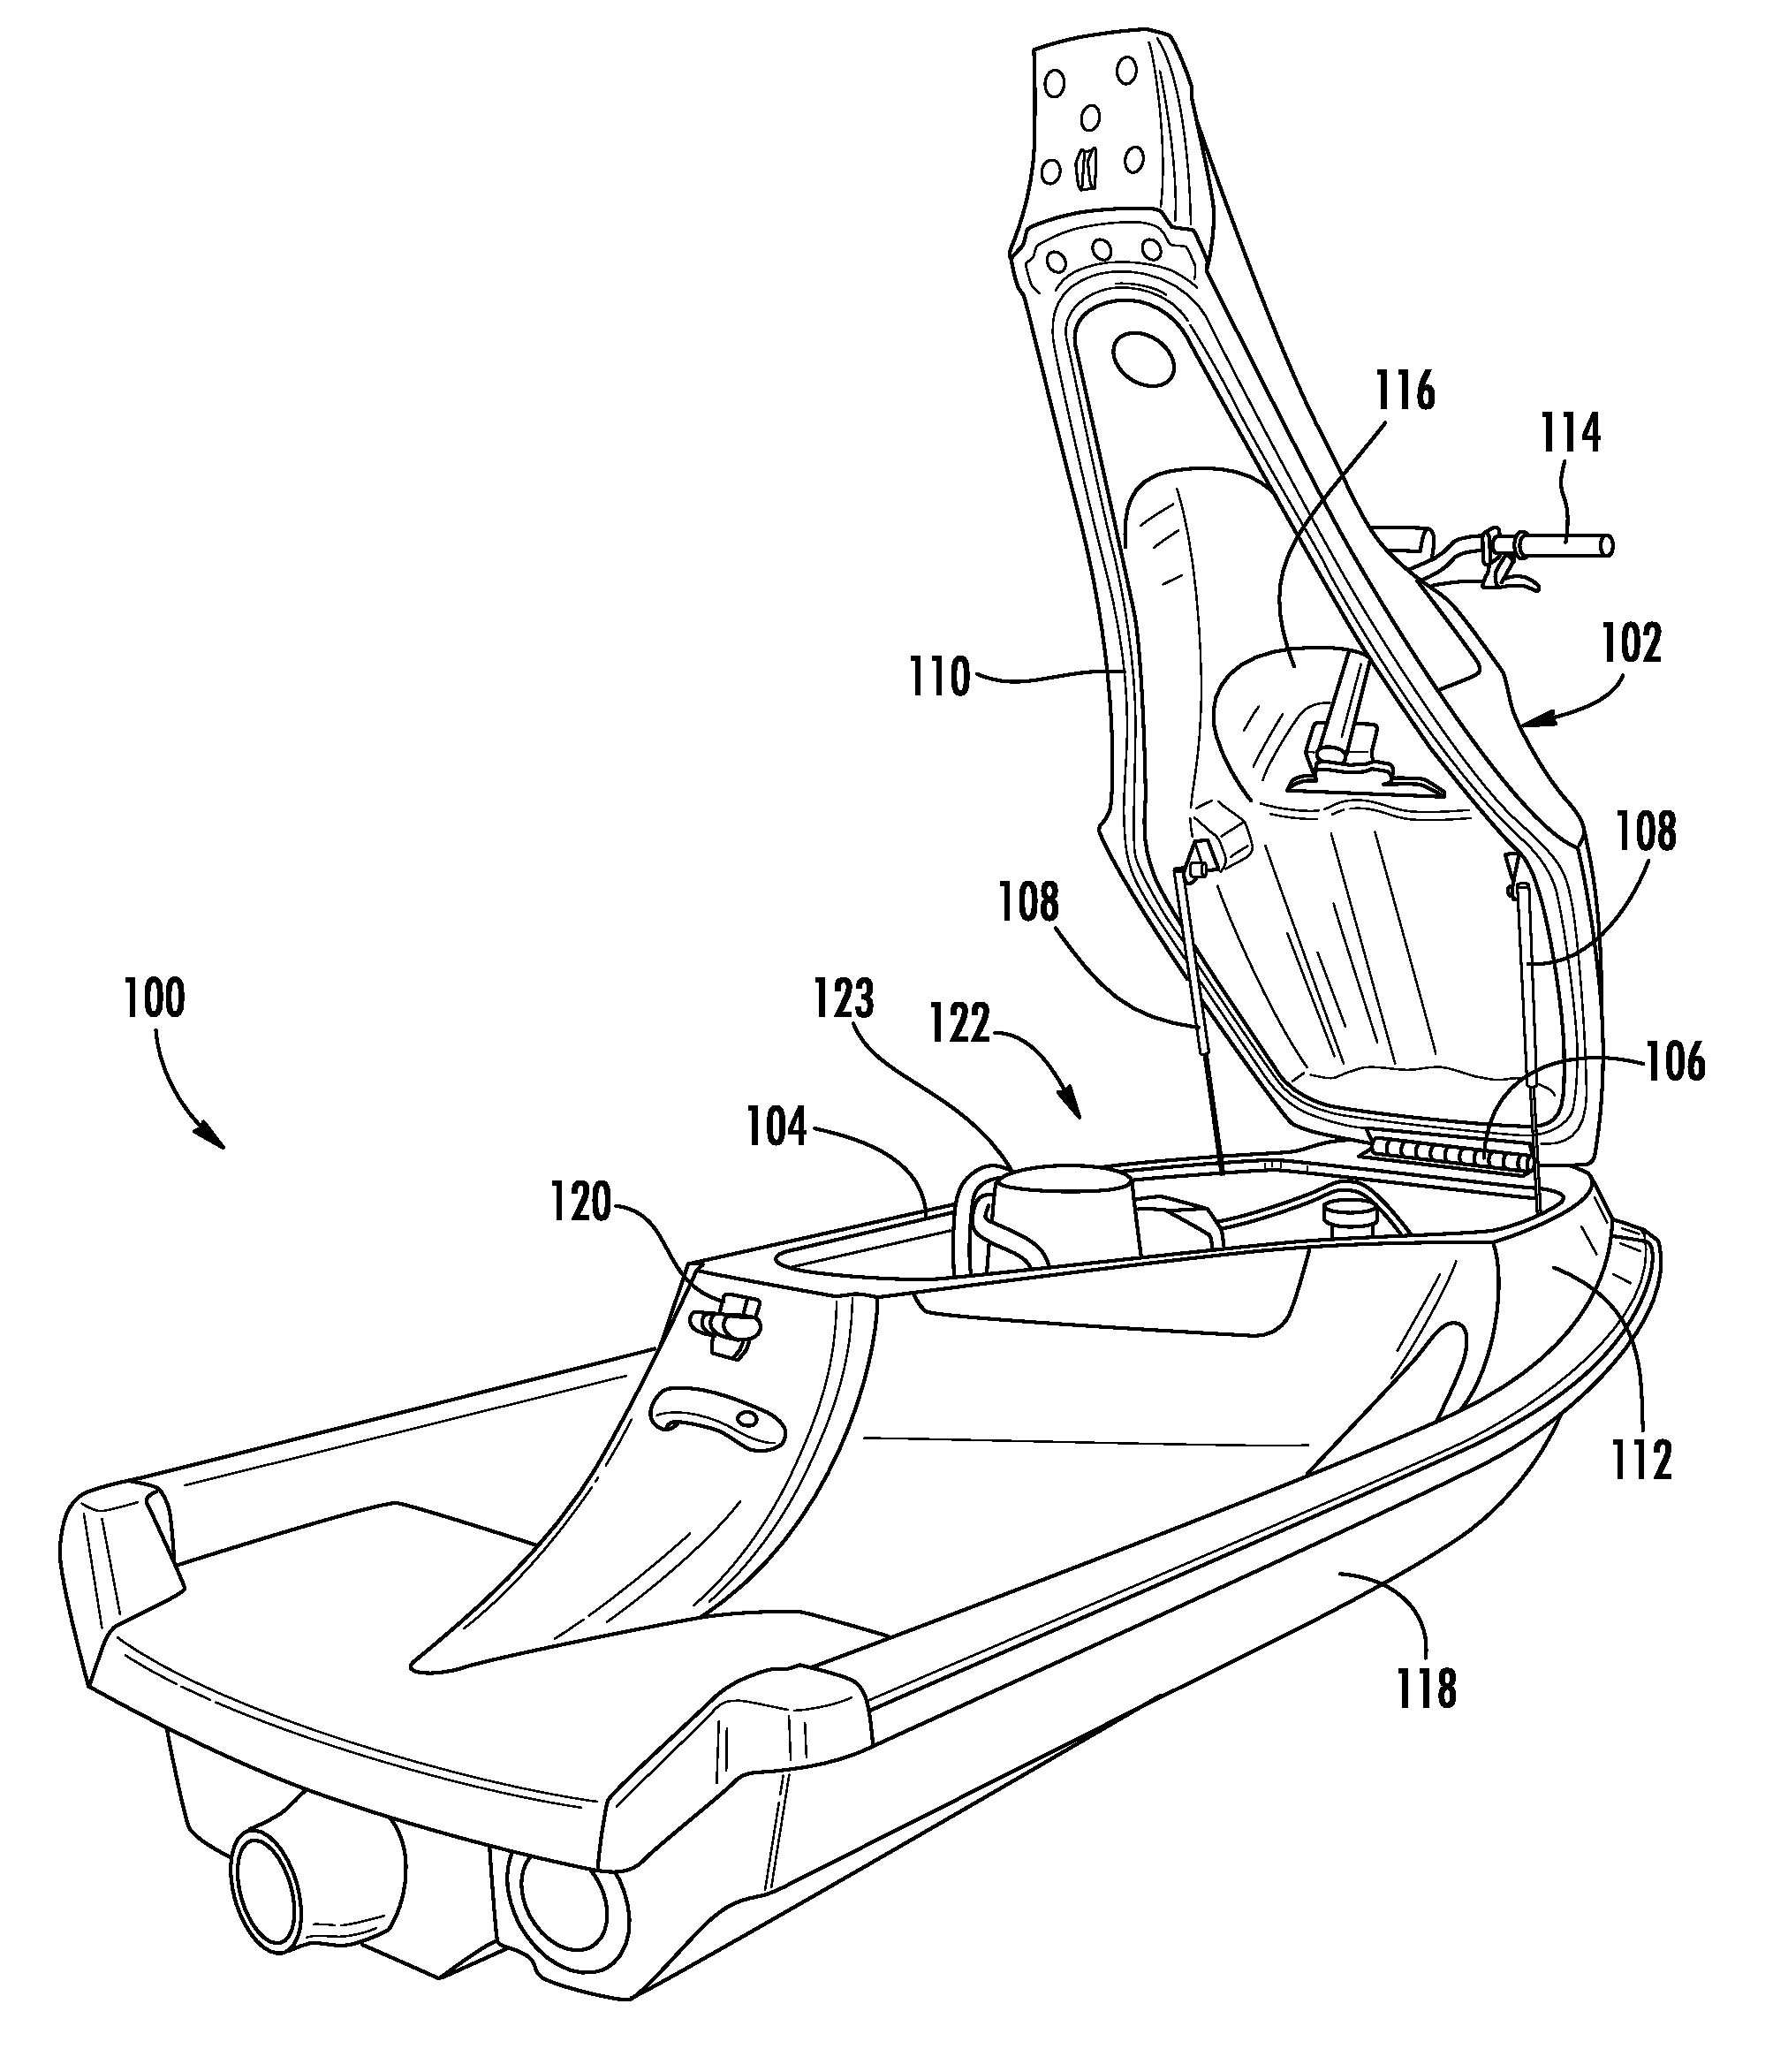 Personal watercraft having a unitary seat and hood assembly